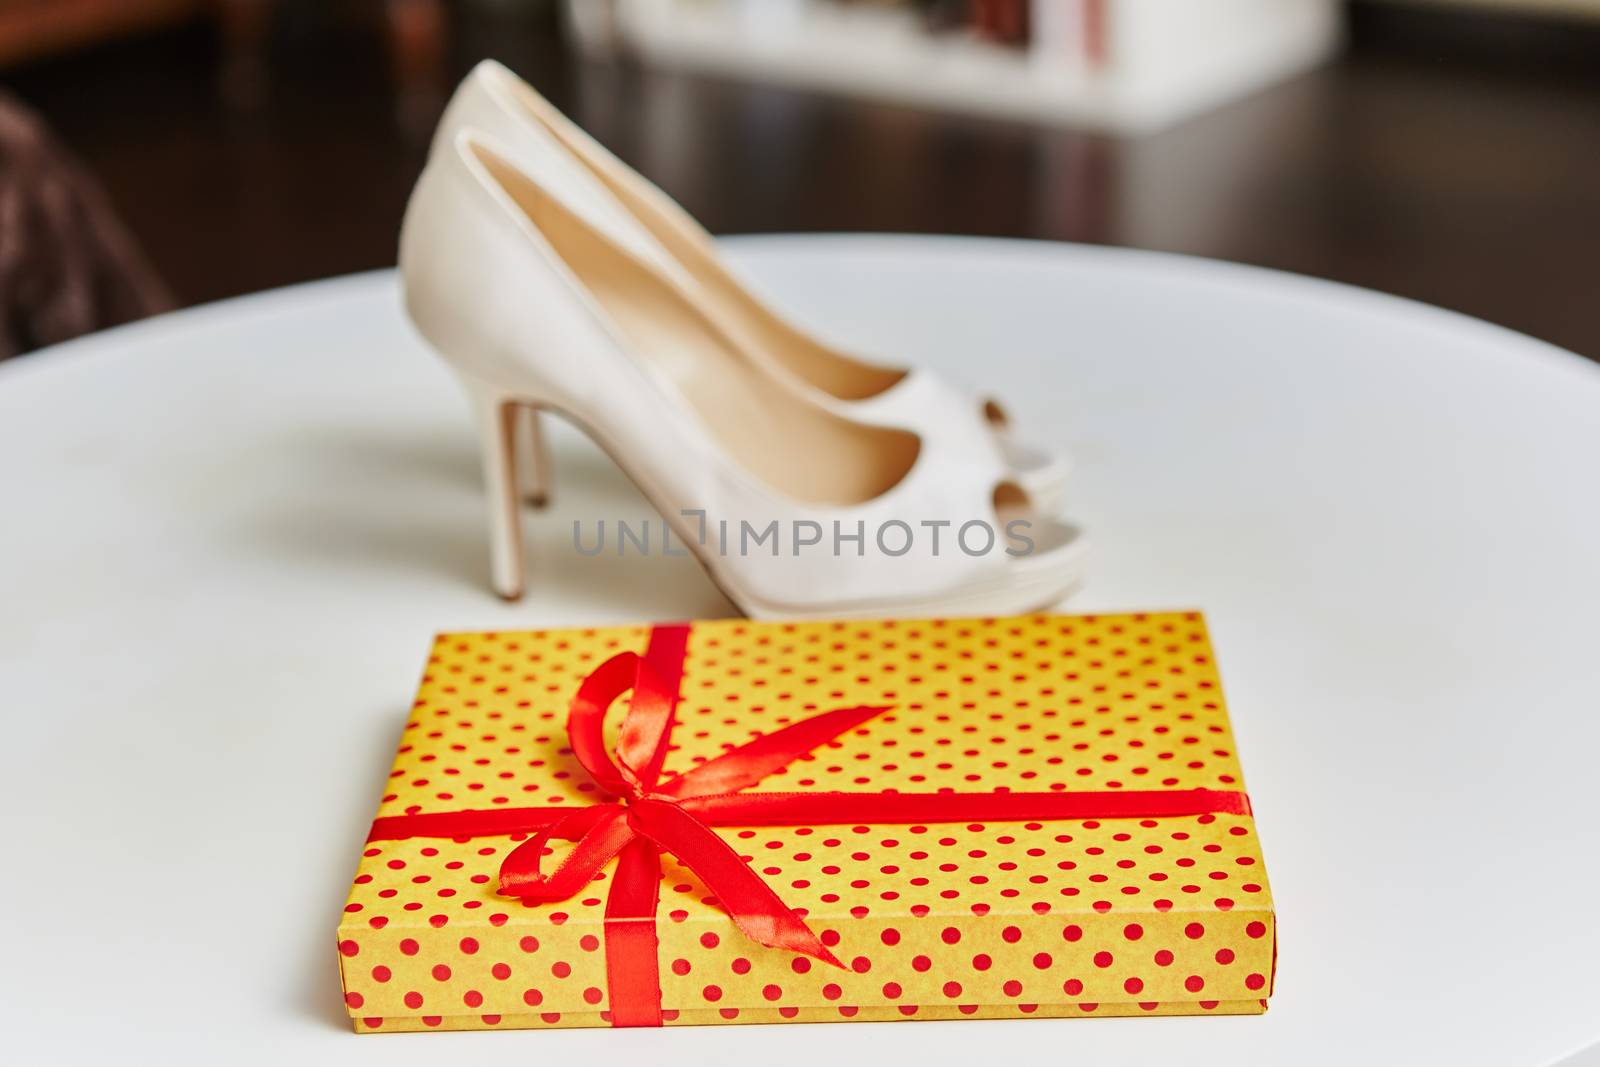 The white wedding shoes for women. Shallow dof